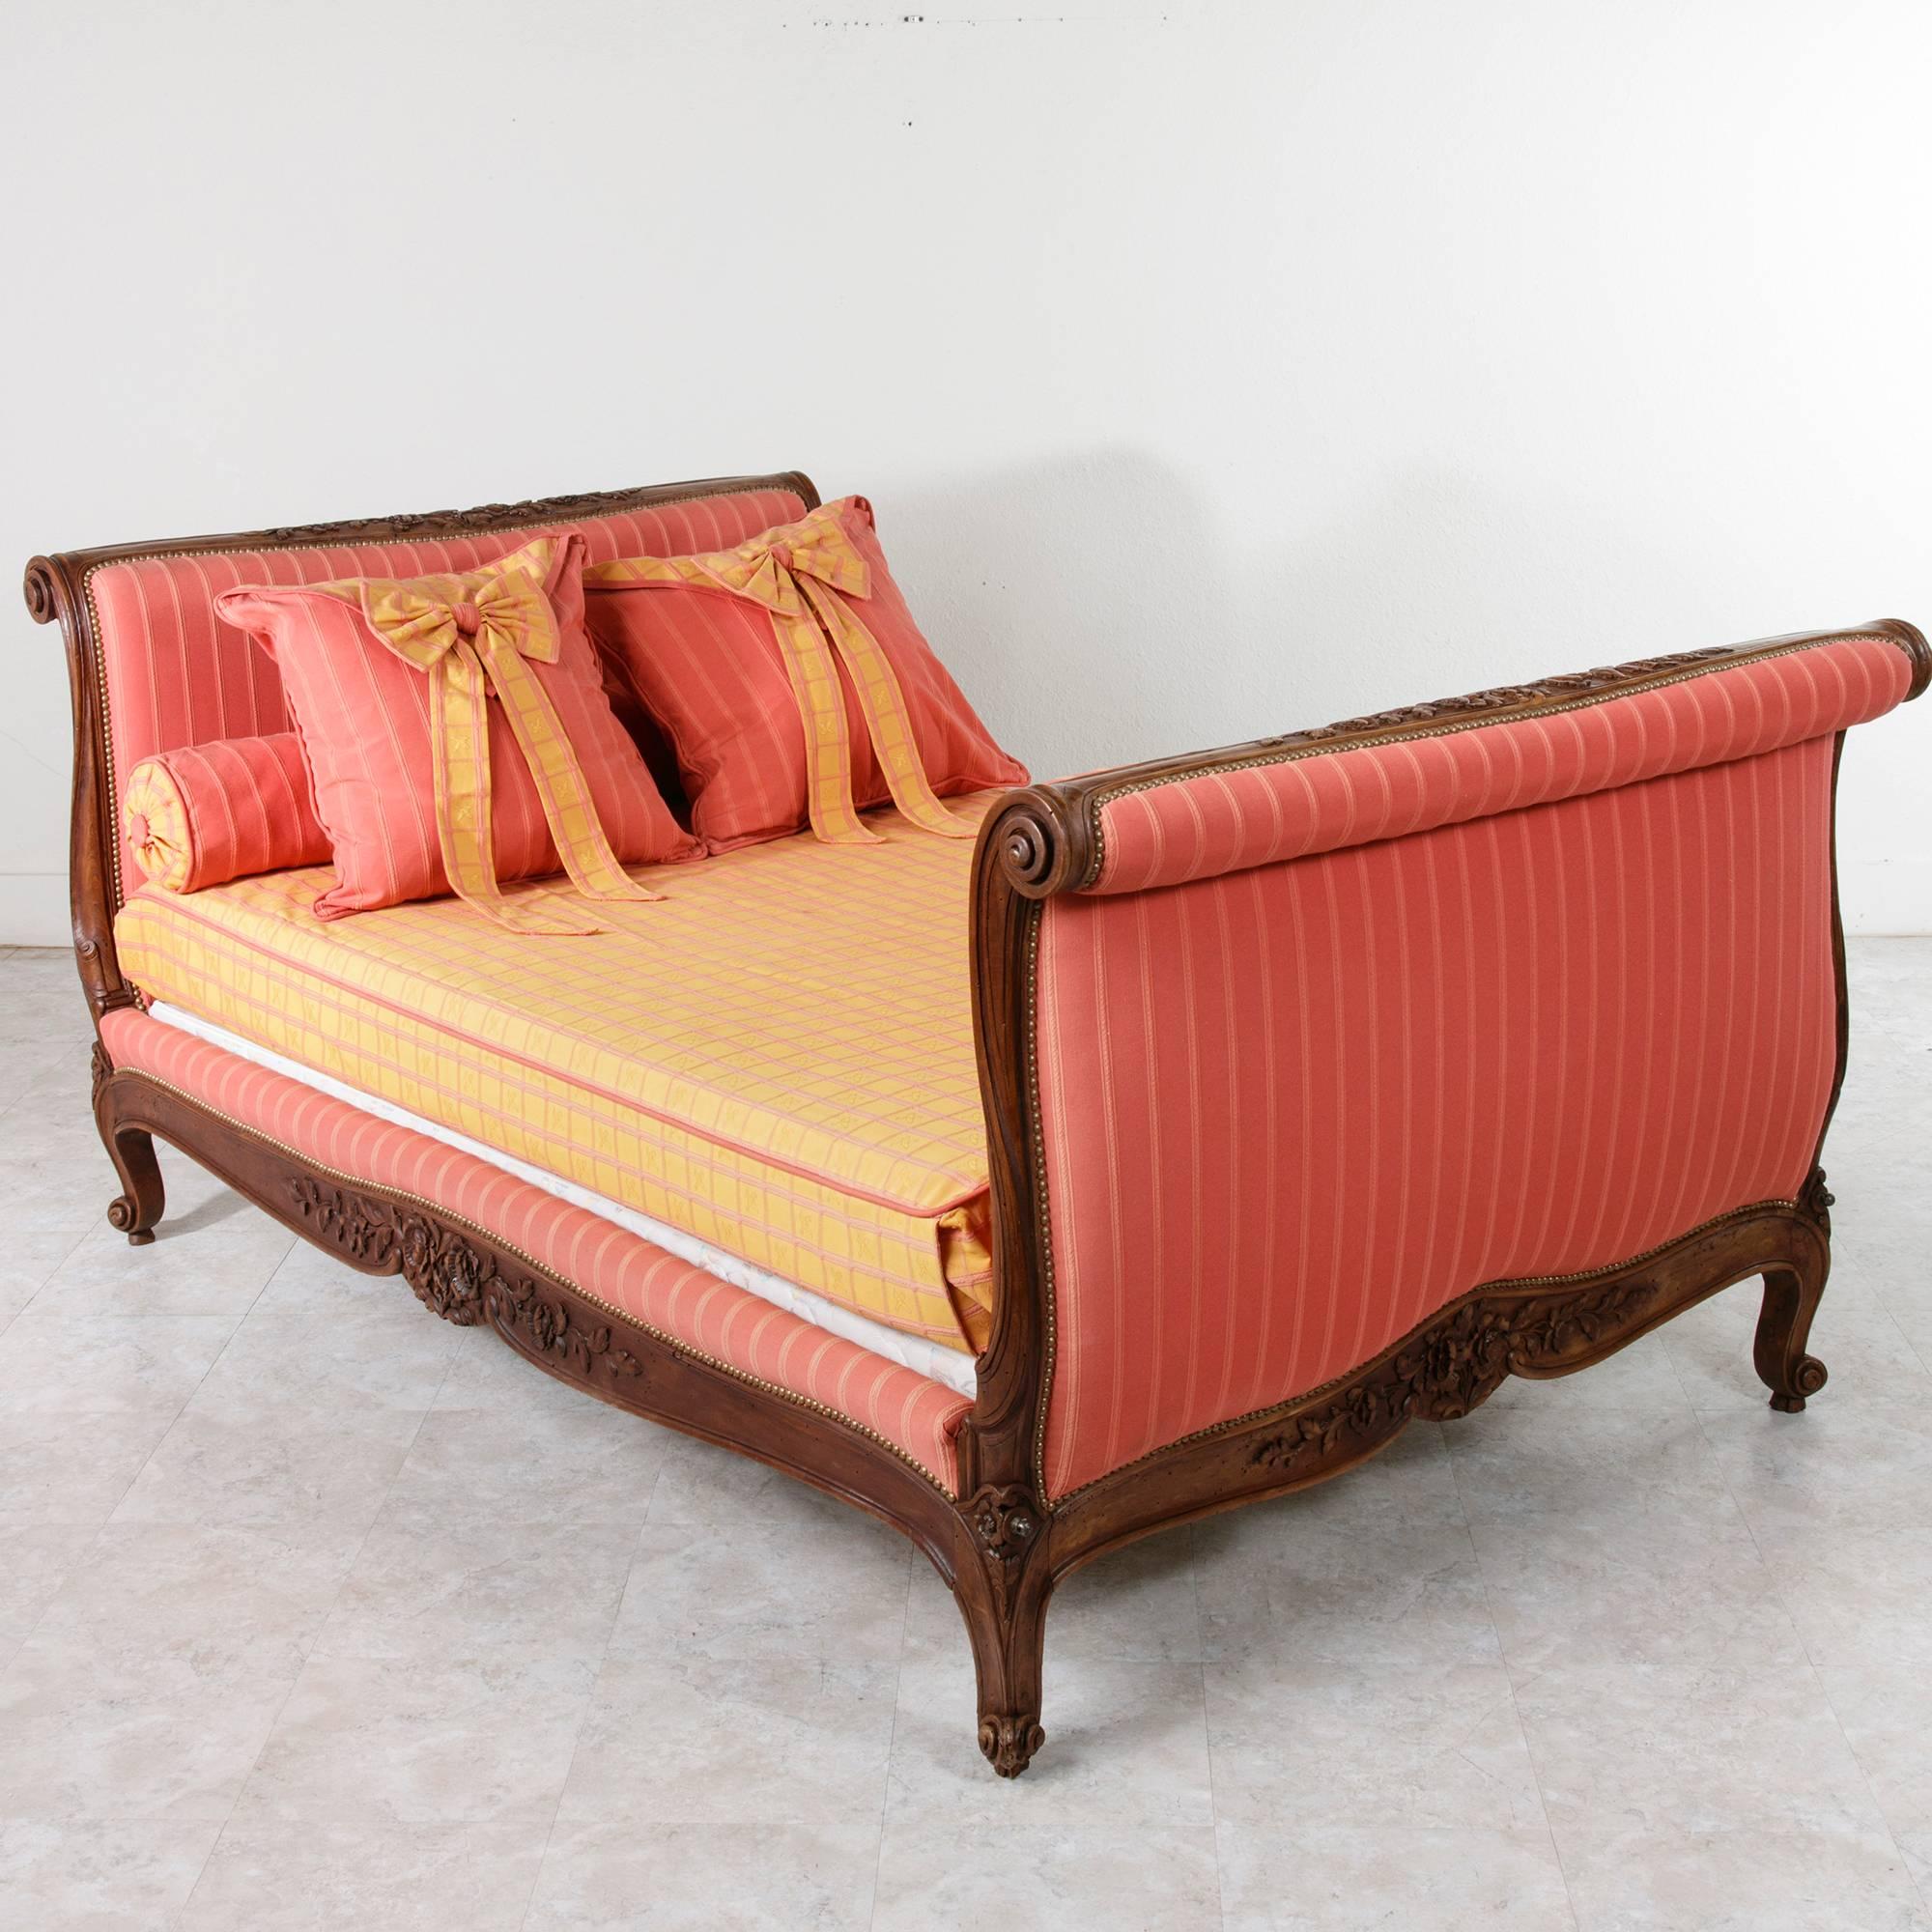 This 19th century solid walnut Louis XV style bed hails from the Provence region in Southern France. The headboard, footboard and both side rails are all lavishly hand-carved with scrolling leaves and flowers. Both head and foot boards are of the